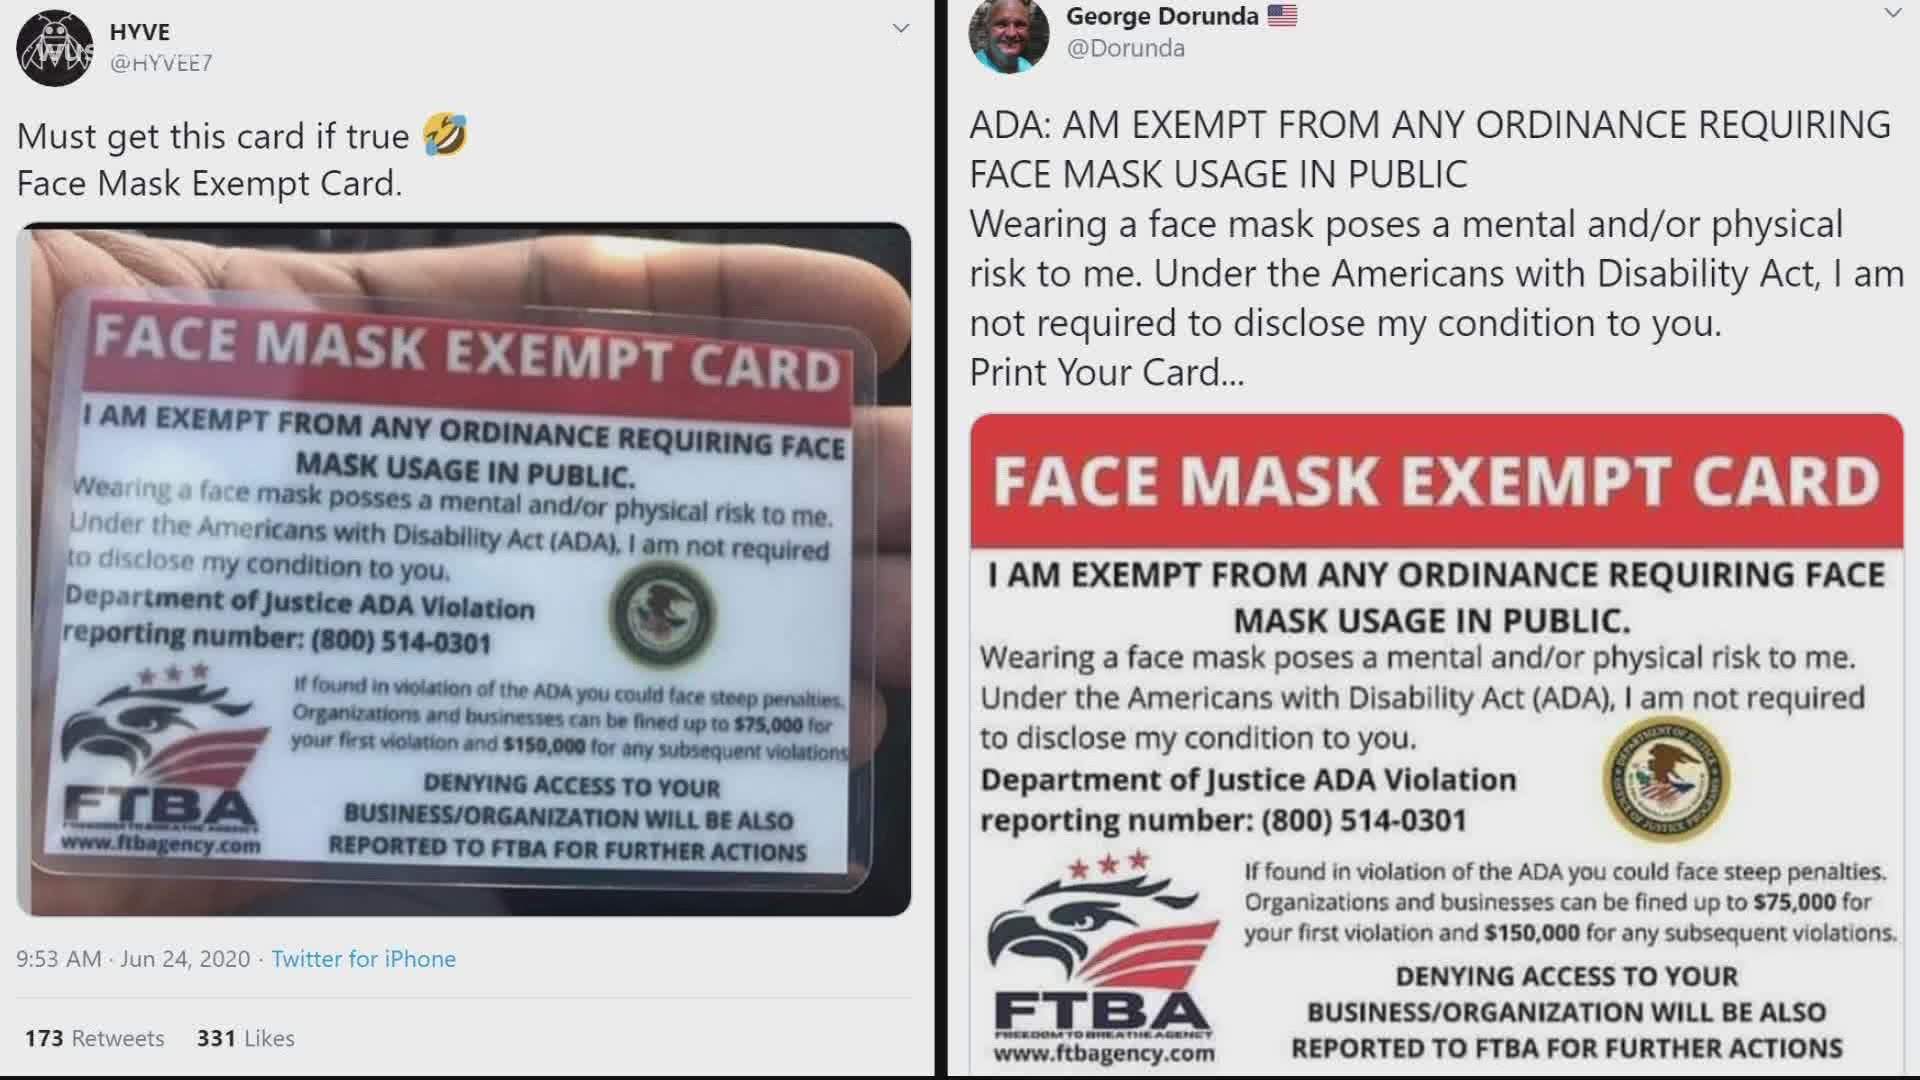 The U.S. Department of Justice said these "fraudulent facemask flyers" were not issued nor endorsed by them.